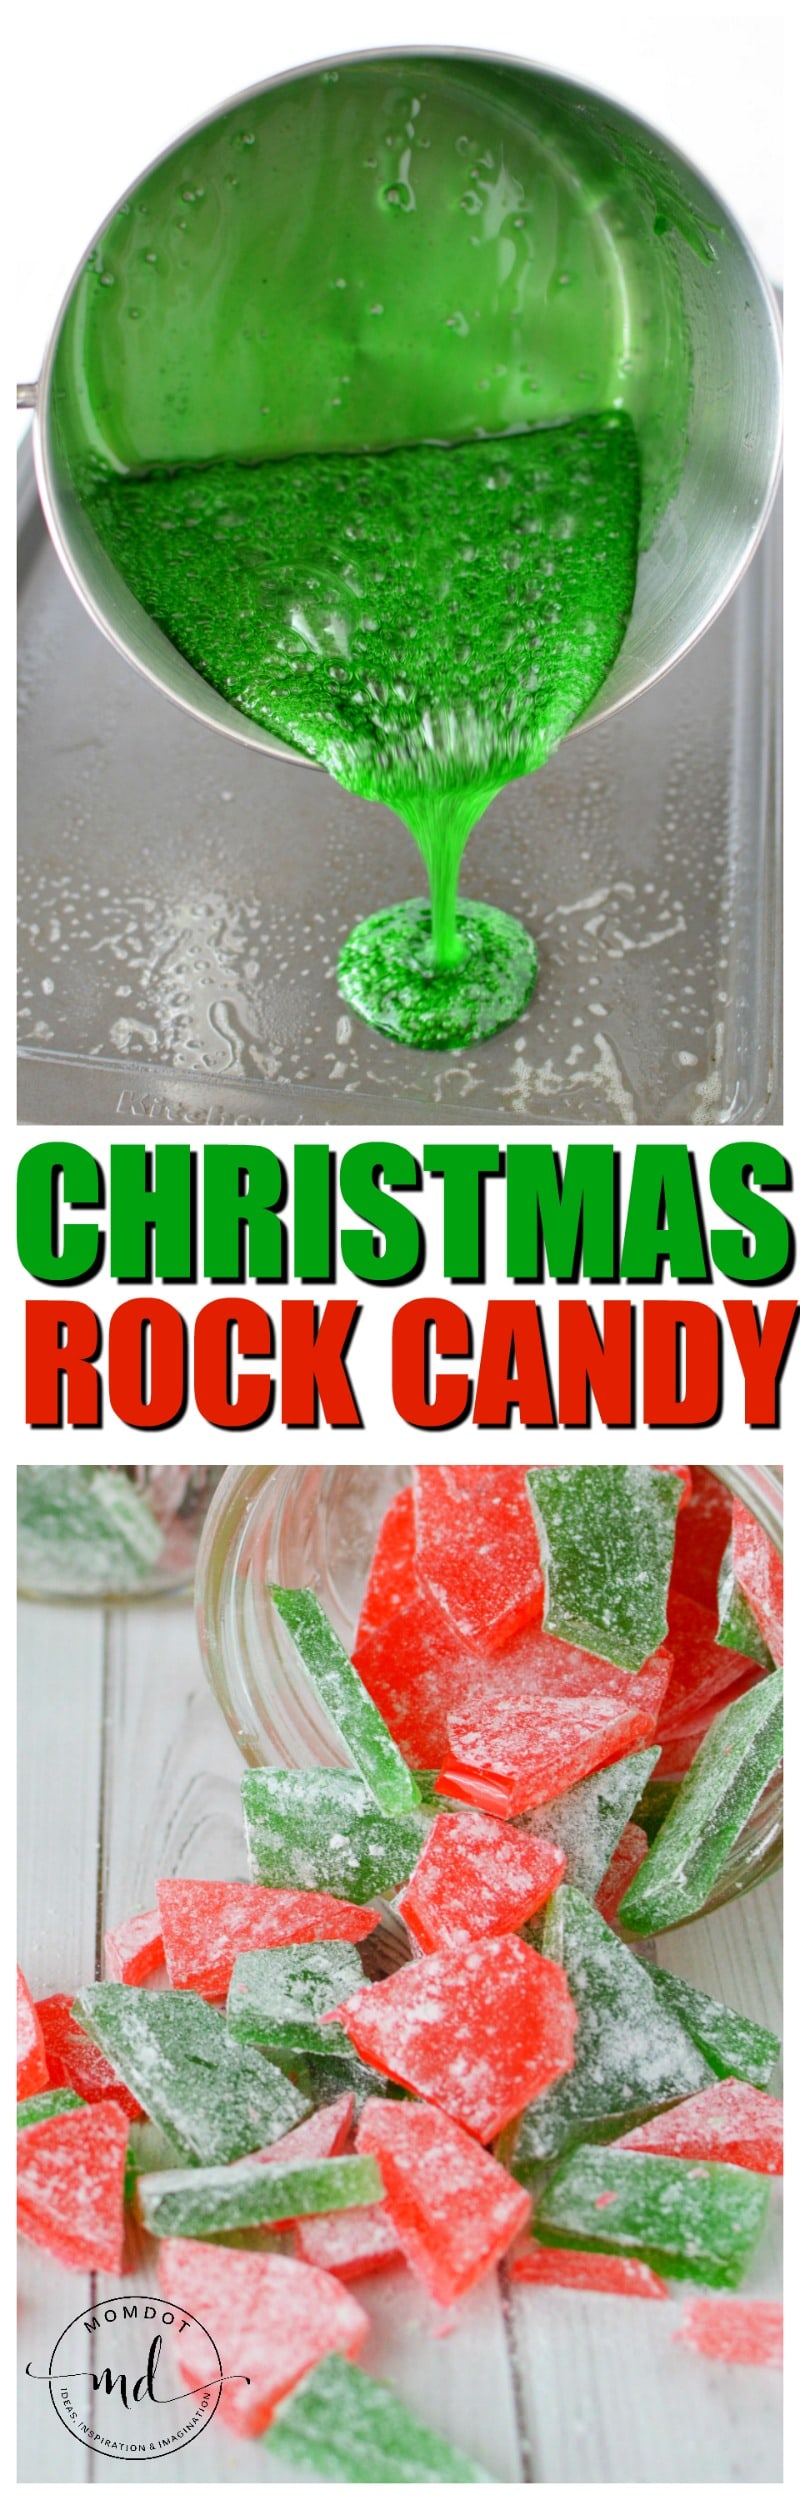 Cinnamon Rock Candy Recipe | Christmas Rock Candy| How to make Rock Candy